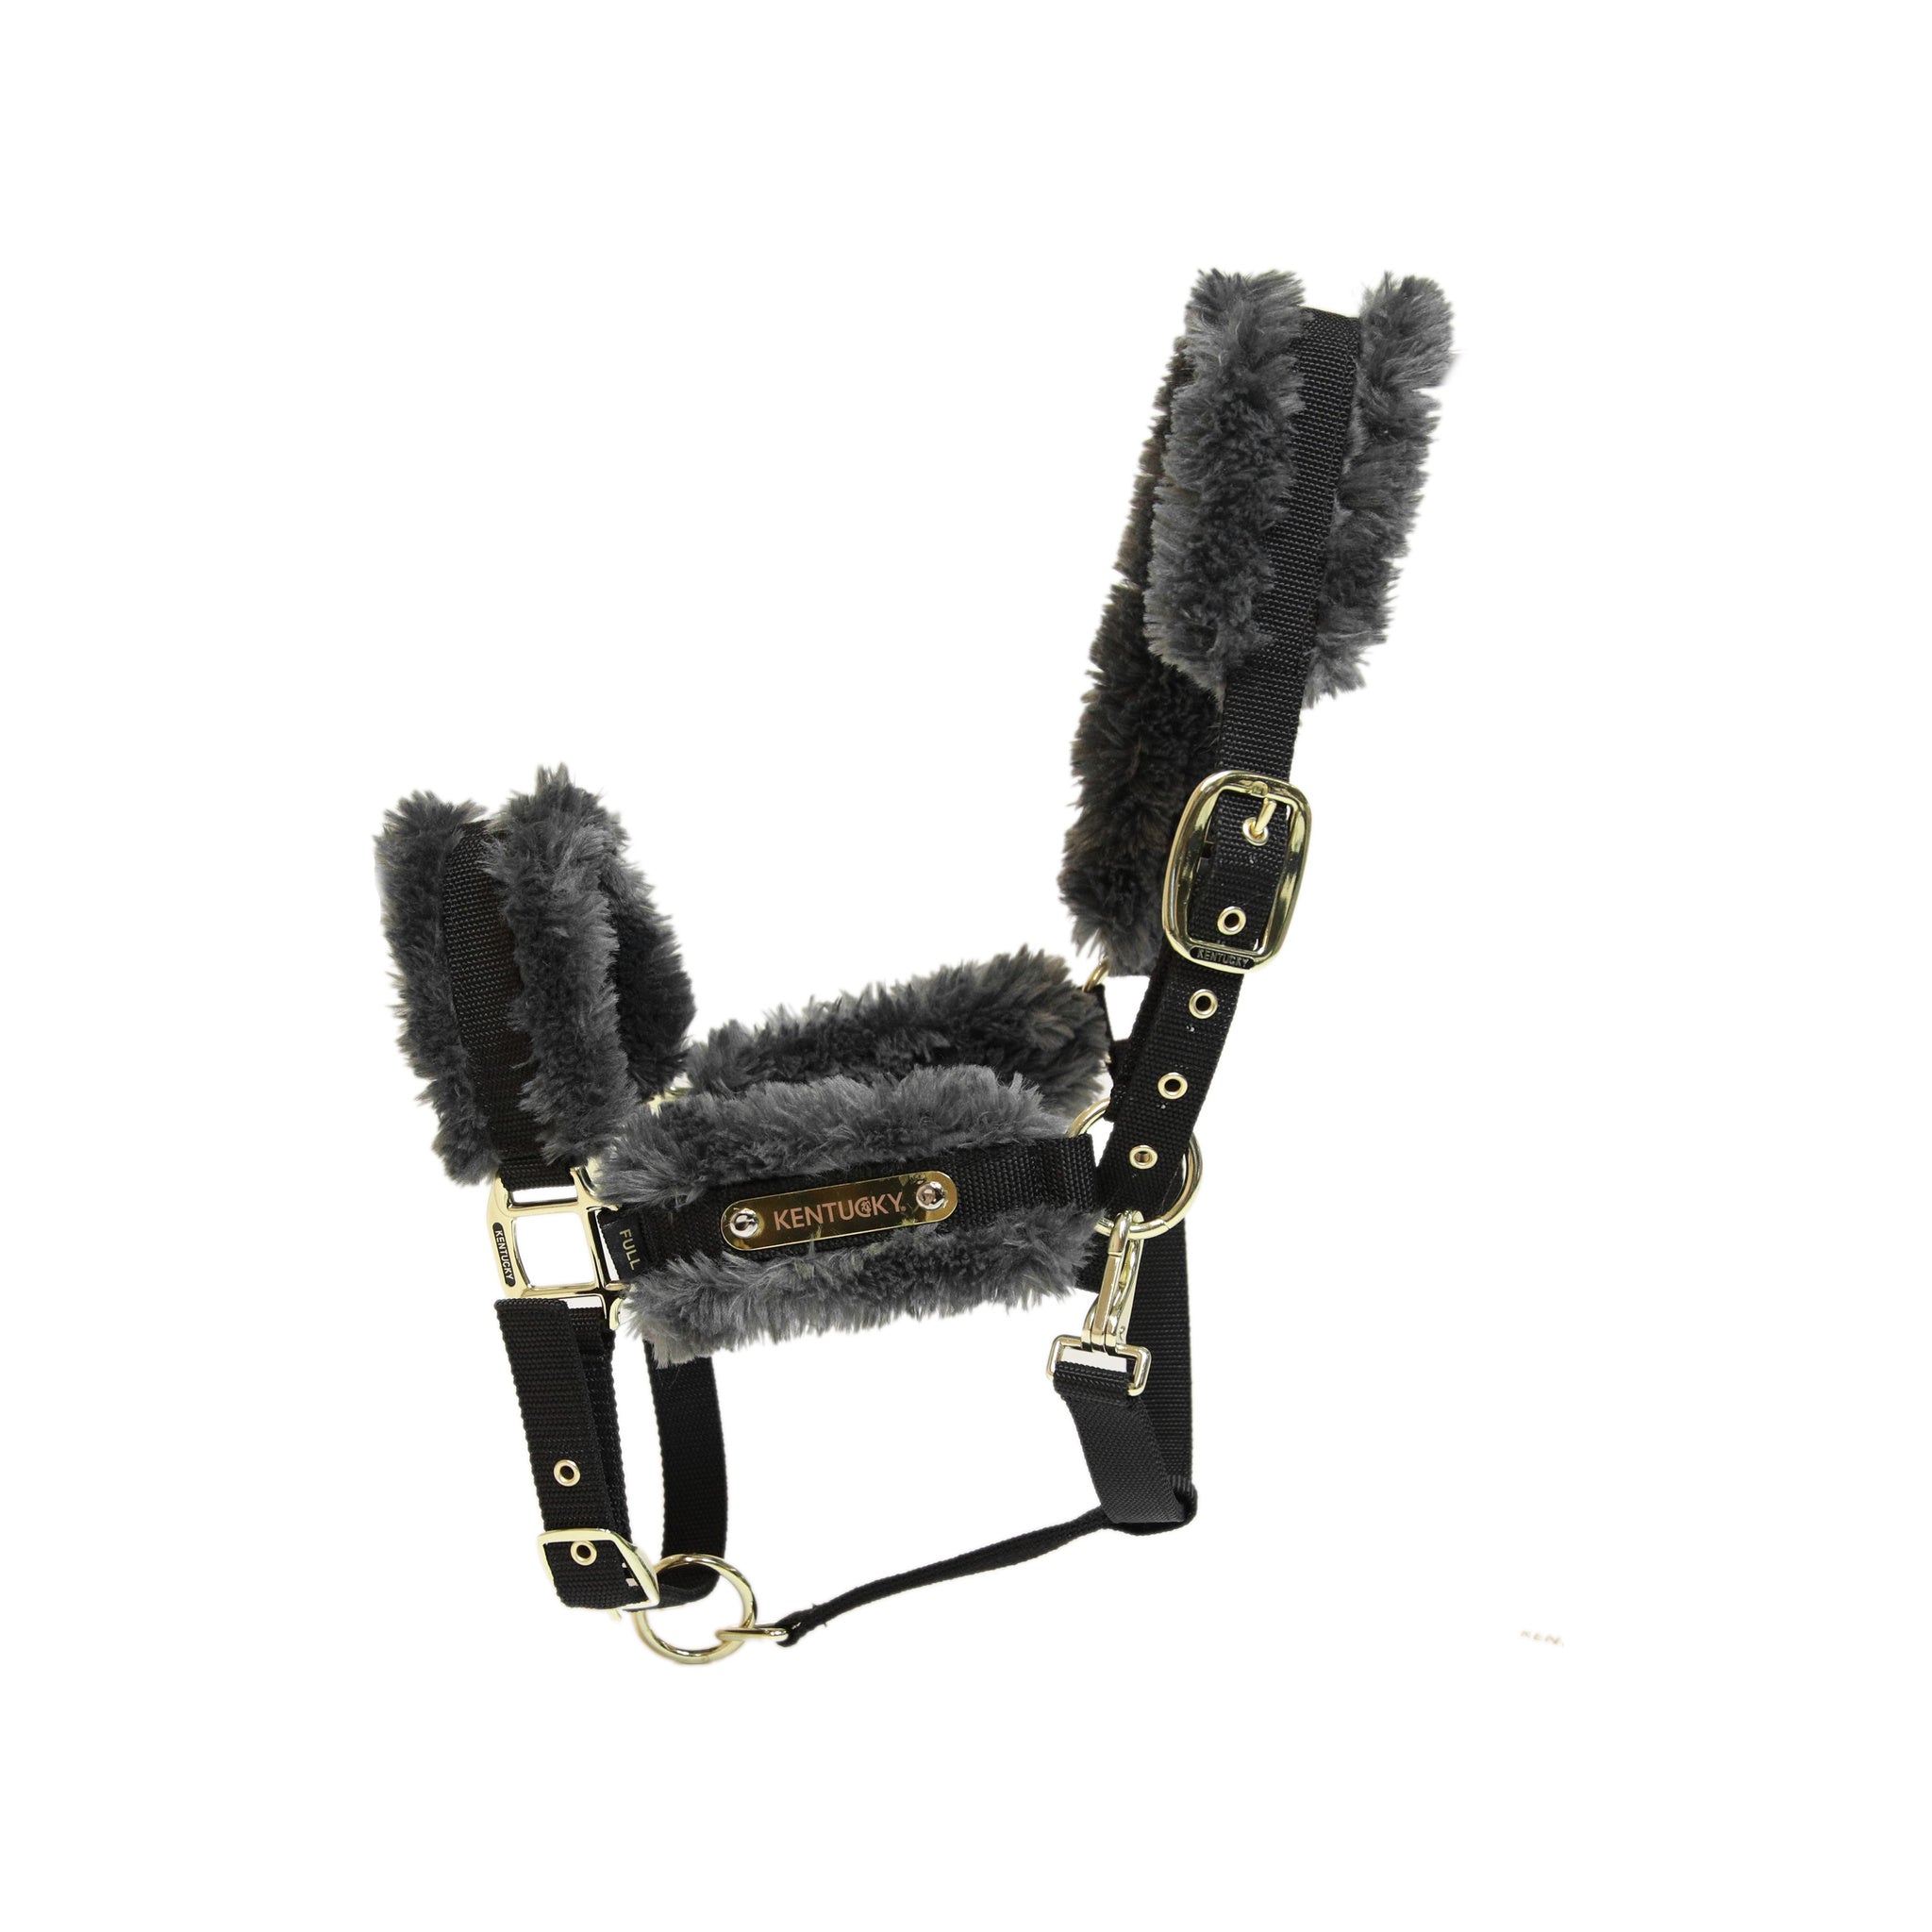 Nylon Sheepskin Halter with artificial sheepskin is for daily use. The halter is made of verystrong nylon in combination with our new artificial sheepskin which is attached directly onto the nylon.